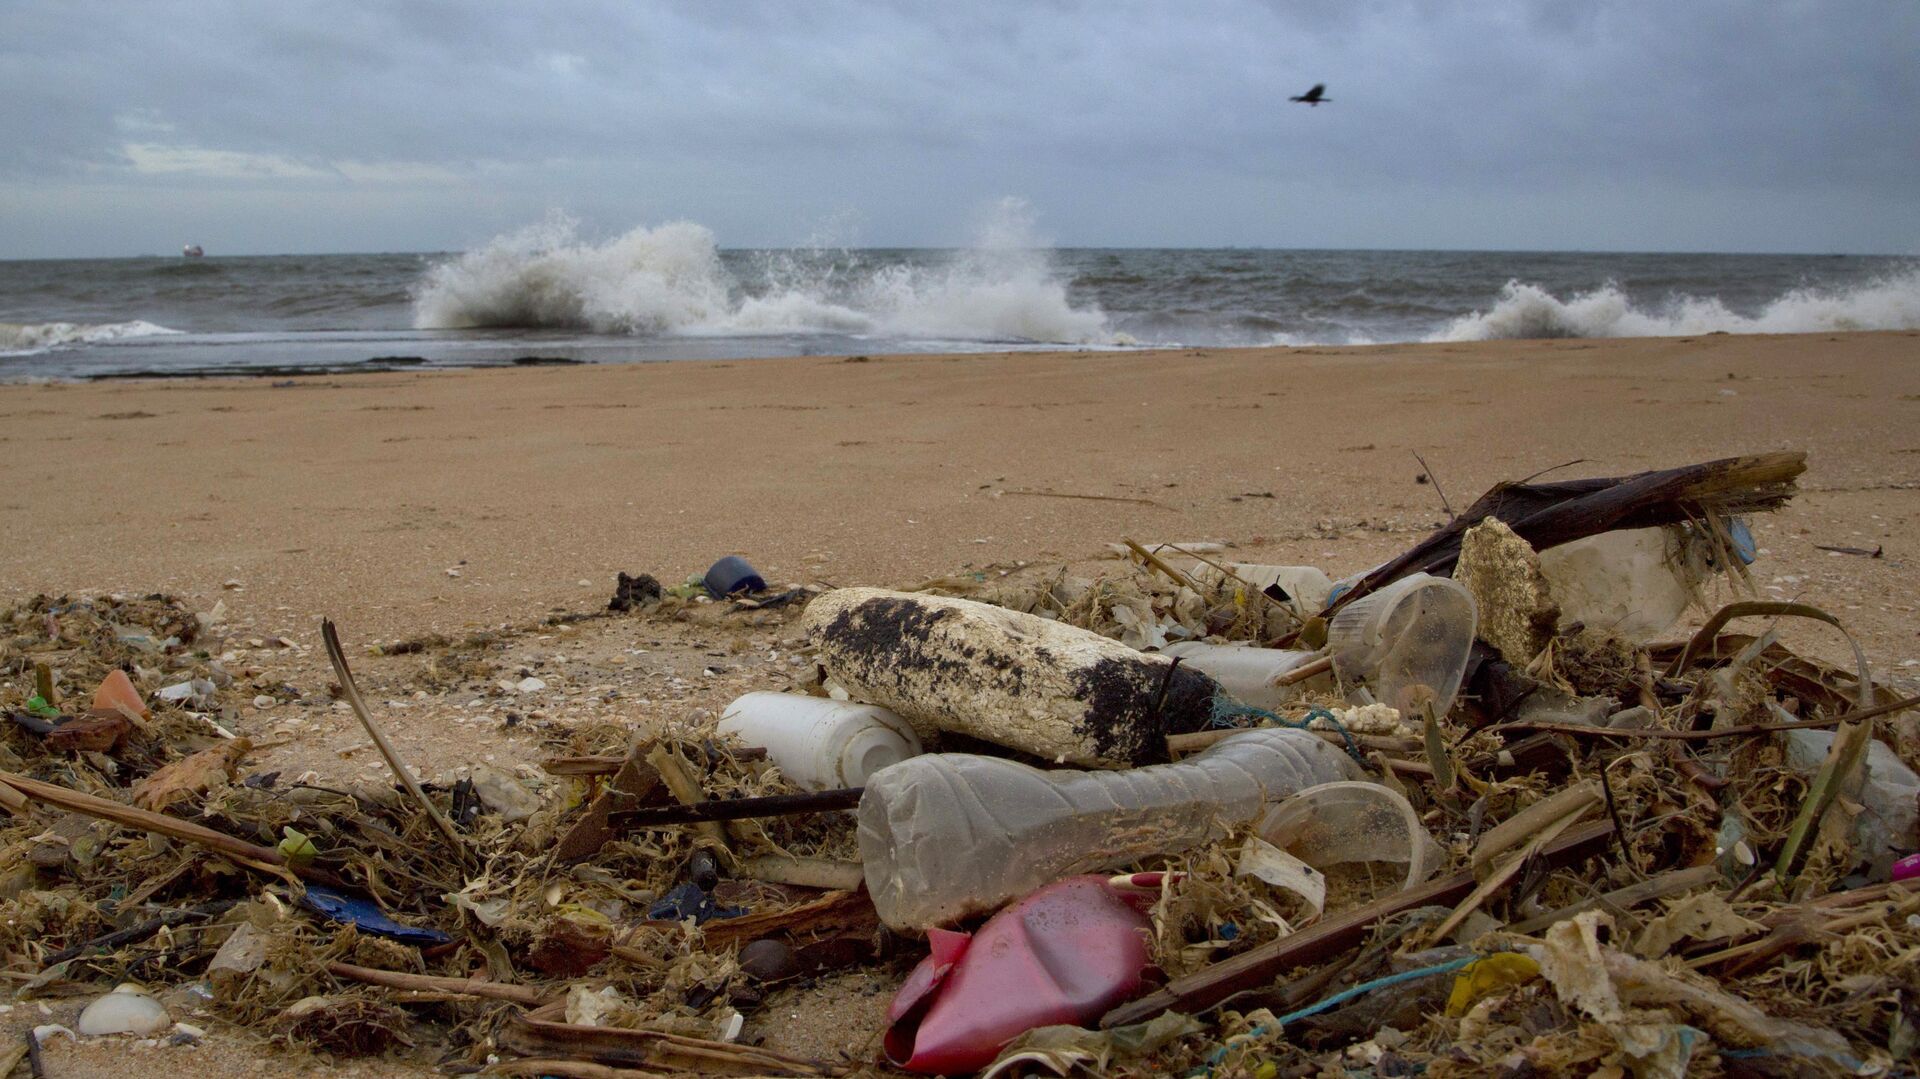 In this Aug. 13, 2015 photo, a plastic bottle lies among other debris washed ashore on the Indian Ocean beach in Uswetakeiyawa, north of Colombo, Sri Lanka. For years along the Cornish coast of Britain, Atlantic Ocean currents have carried thousands of Lego pieces onto the beaches. In Kenya, cheap flip-flop sandals are churned relentlessly in the Indian Ocean surf, until finally being spit out onto the sand. In Bangladesh, fishermen are haunted by floating corpses that the Bay of Bengal sometimes puts in their path. And now, perhaps, the oceans have revealed something else: parts of Malaysian Airlines Flight 370, the jetliner that vanished 17 months ago with 239 people on board.  - Sputnik International, 1920, 29.04.2022